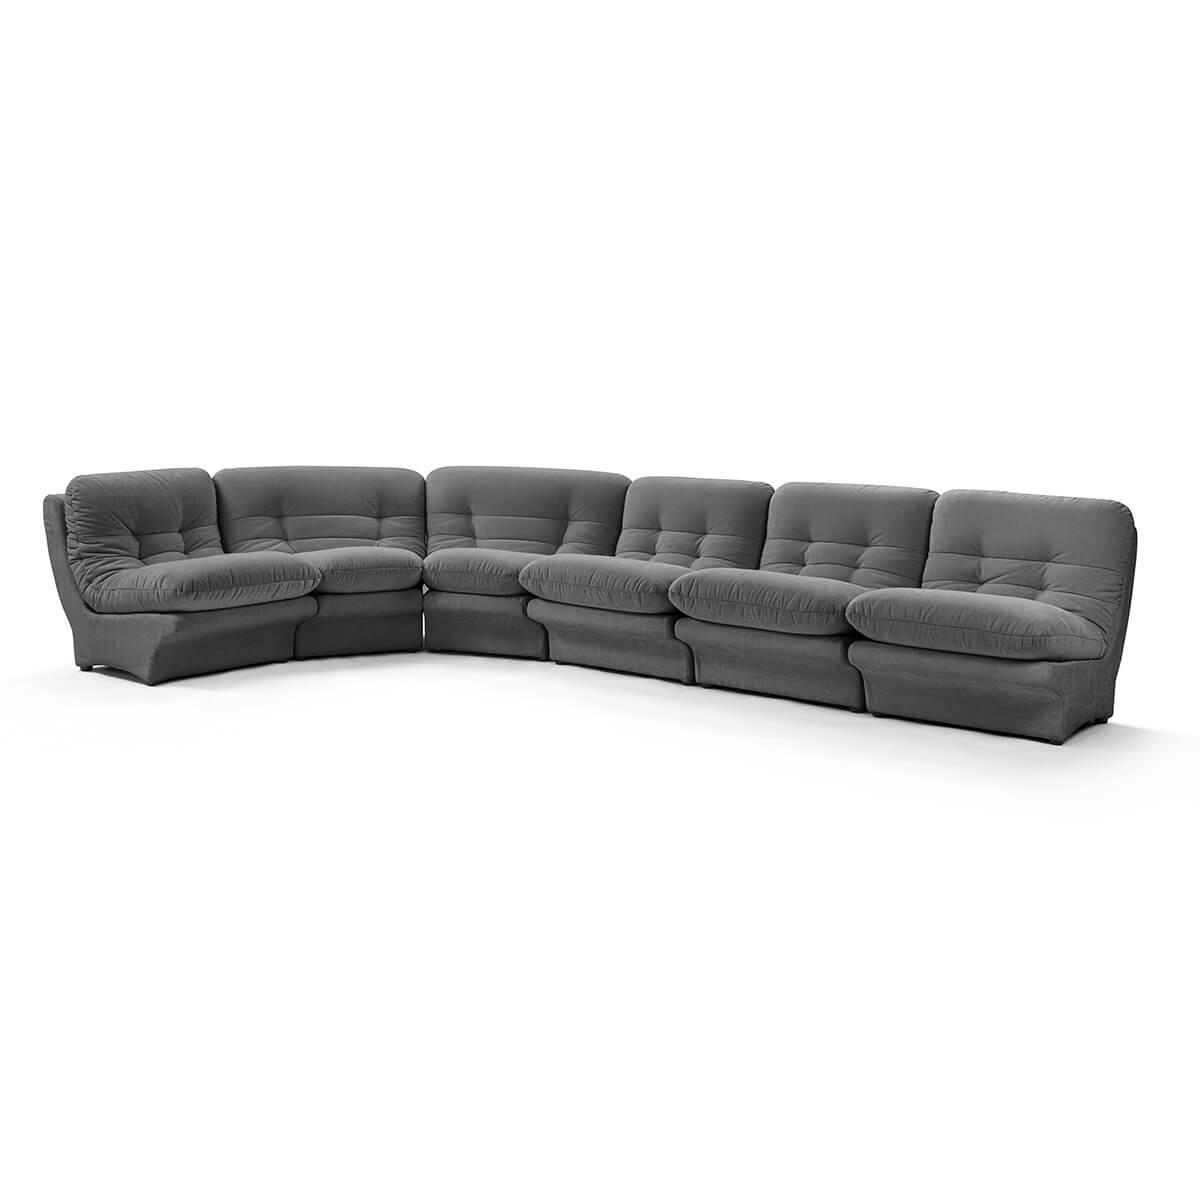 Carsons Mid Century Curved Modular Sectional Sofa / Combination 003 Chenille Helios-Pewter Grey